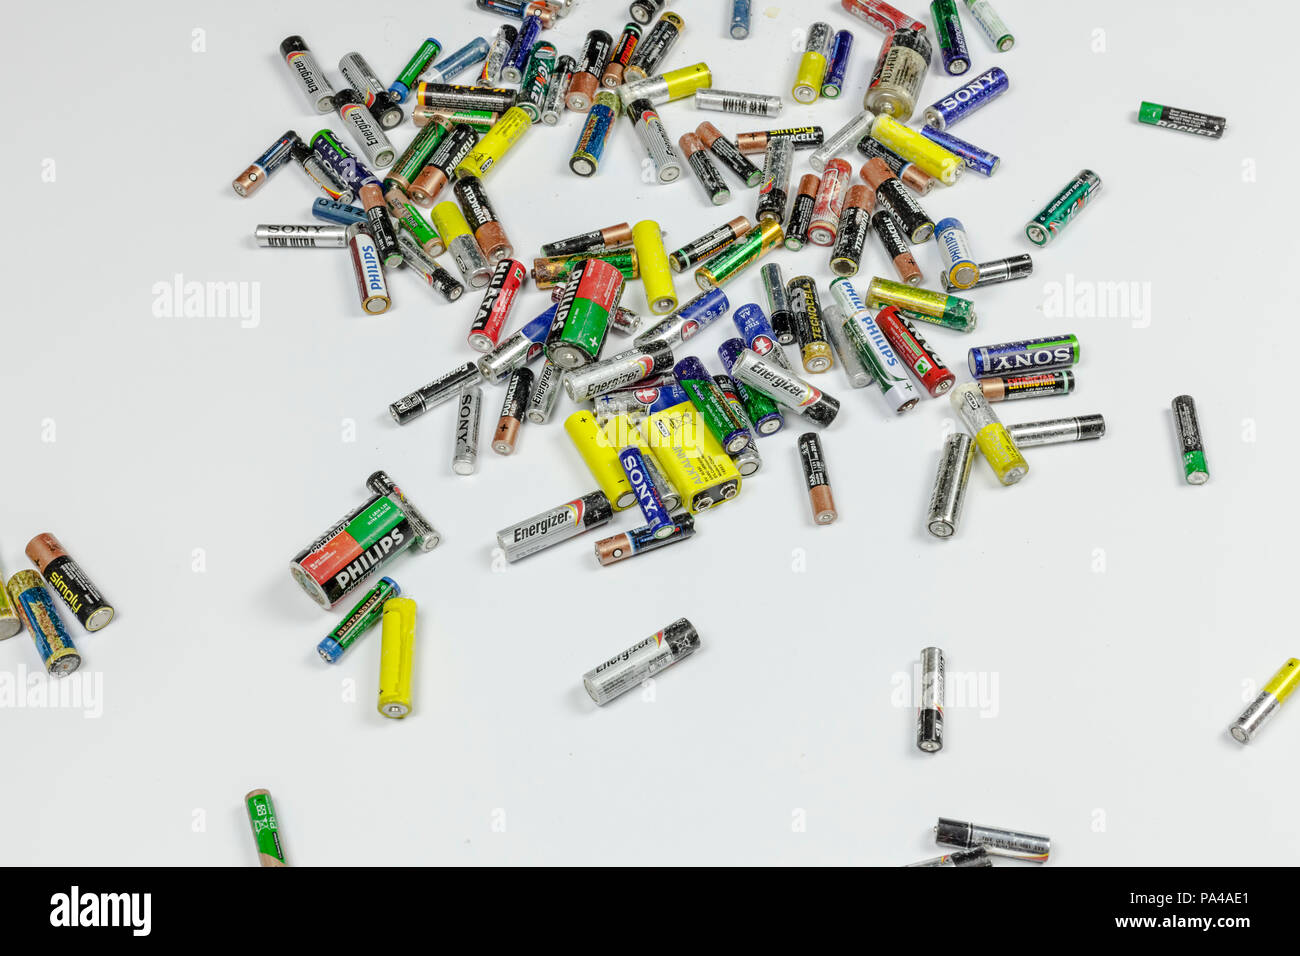 BARI, ITALY - JUNE 9, 2017 - Old batteries on a white background. Studio shot, editorial. Concept: waste, recycling. Stock Photo